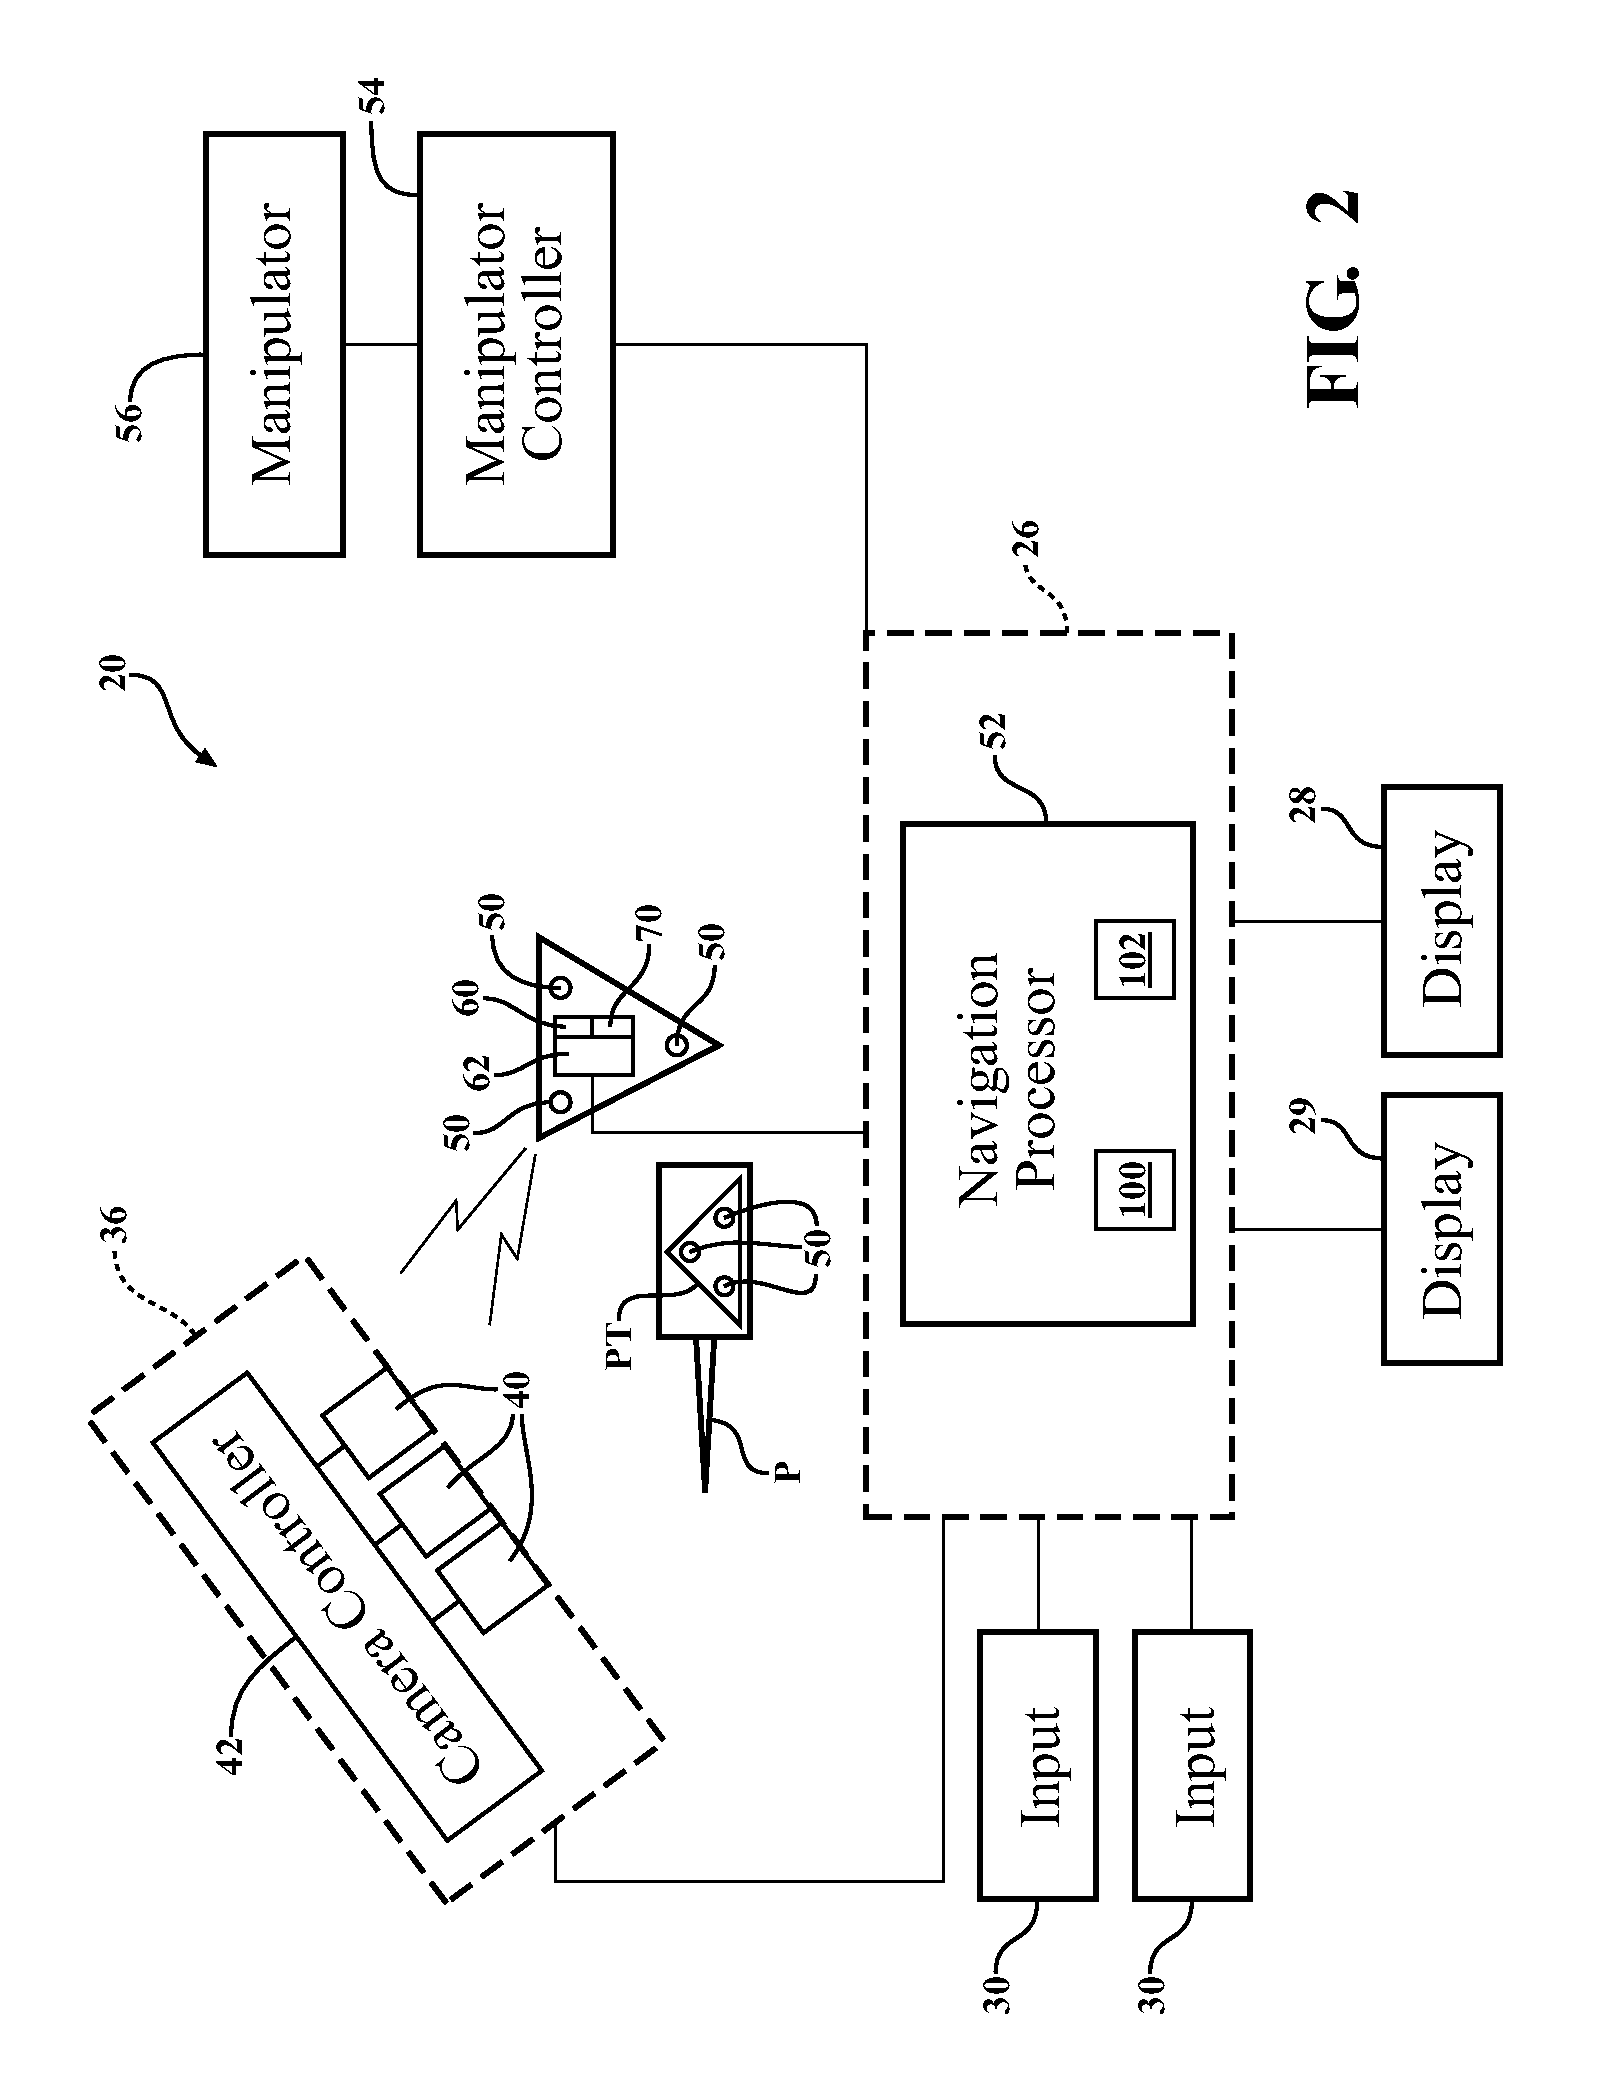 Navigation system including optical and non-optical sensors